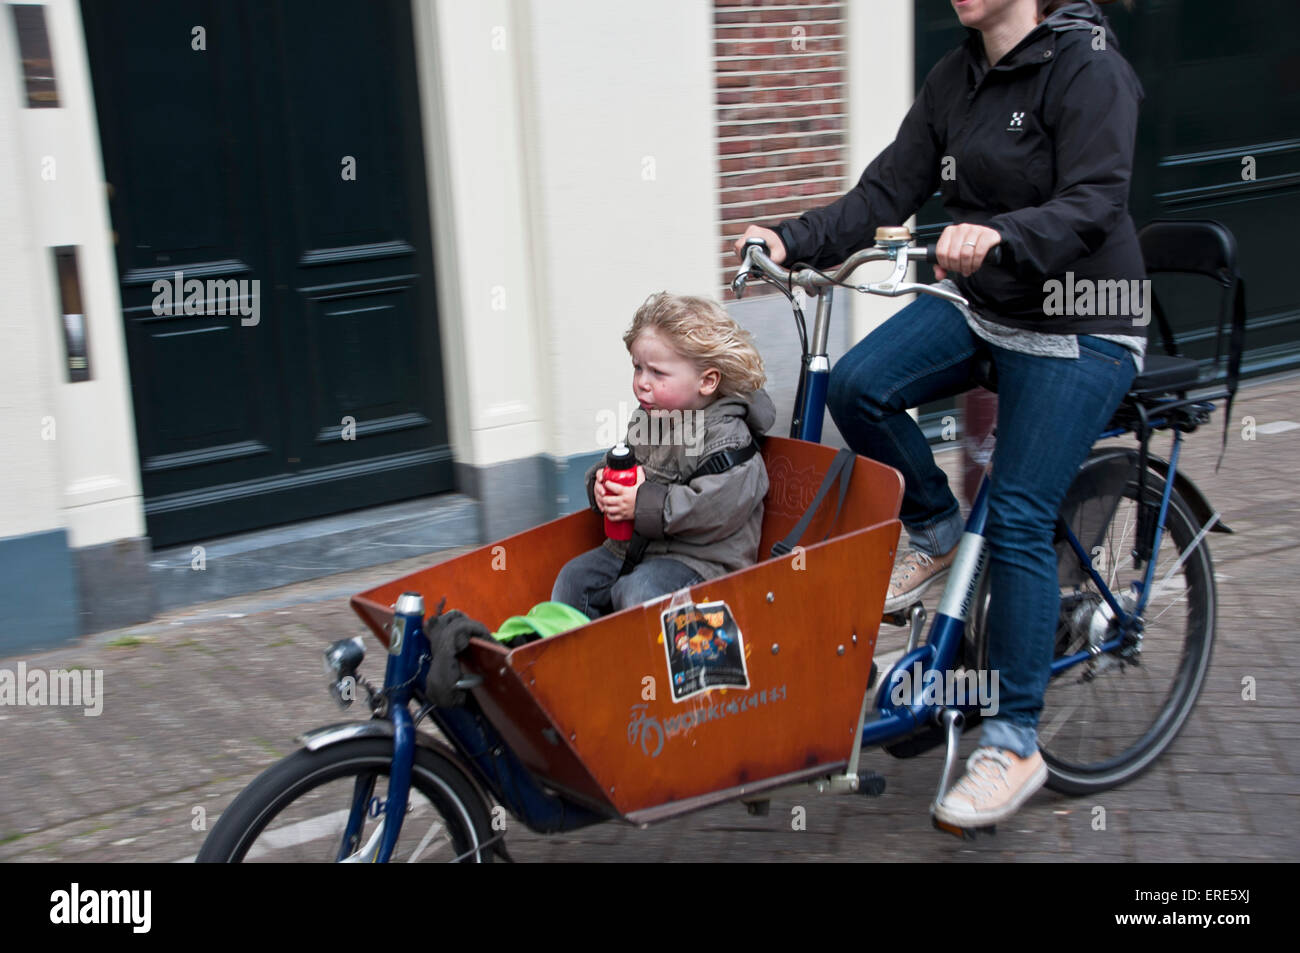 Child riding in box on the front of a bicycle in Amsterdam Stock Photo -  Alamy